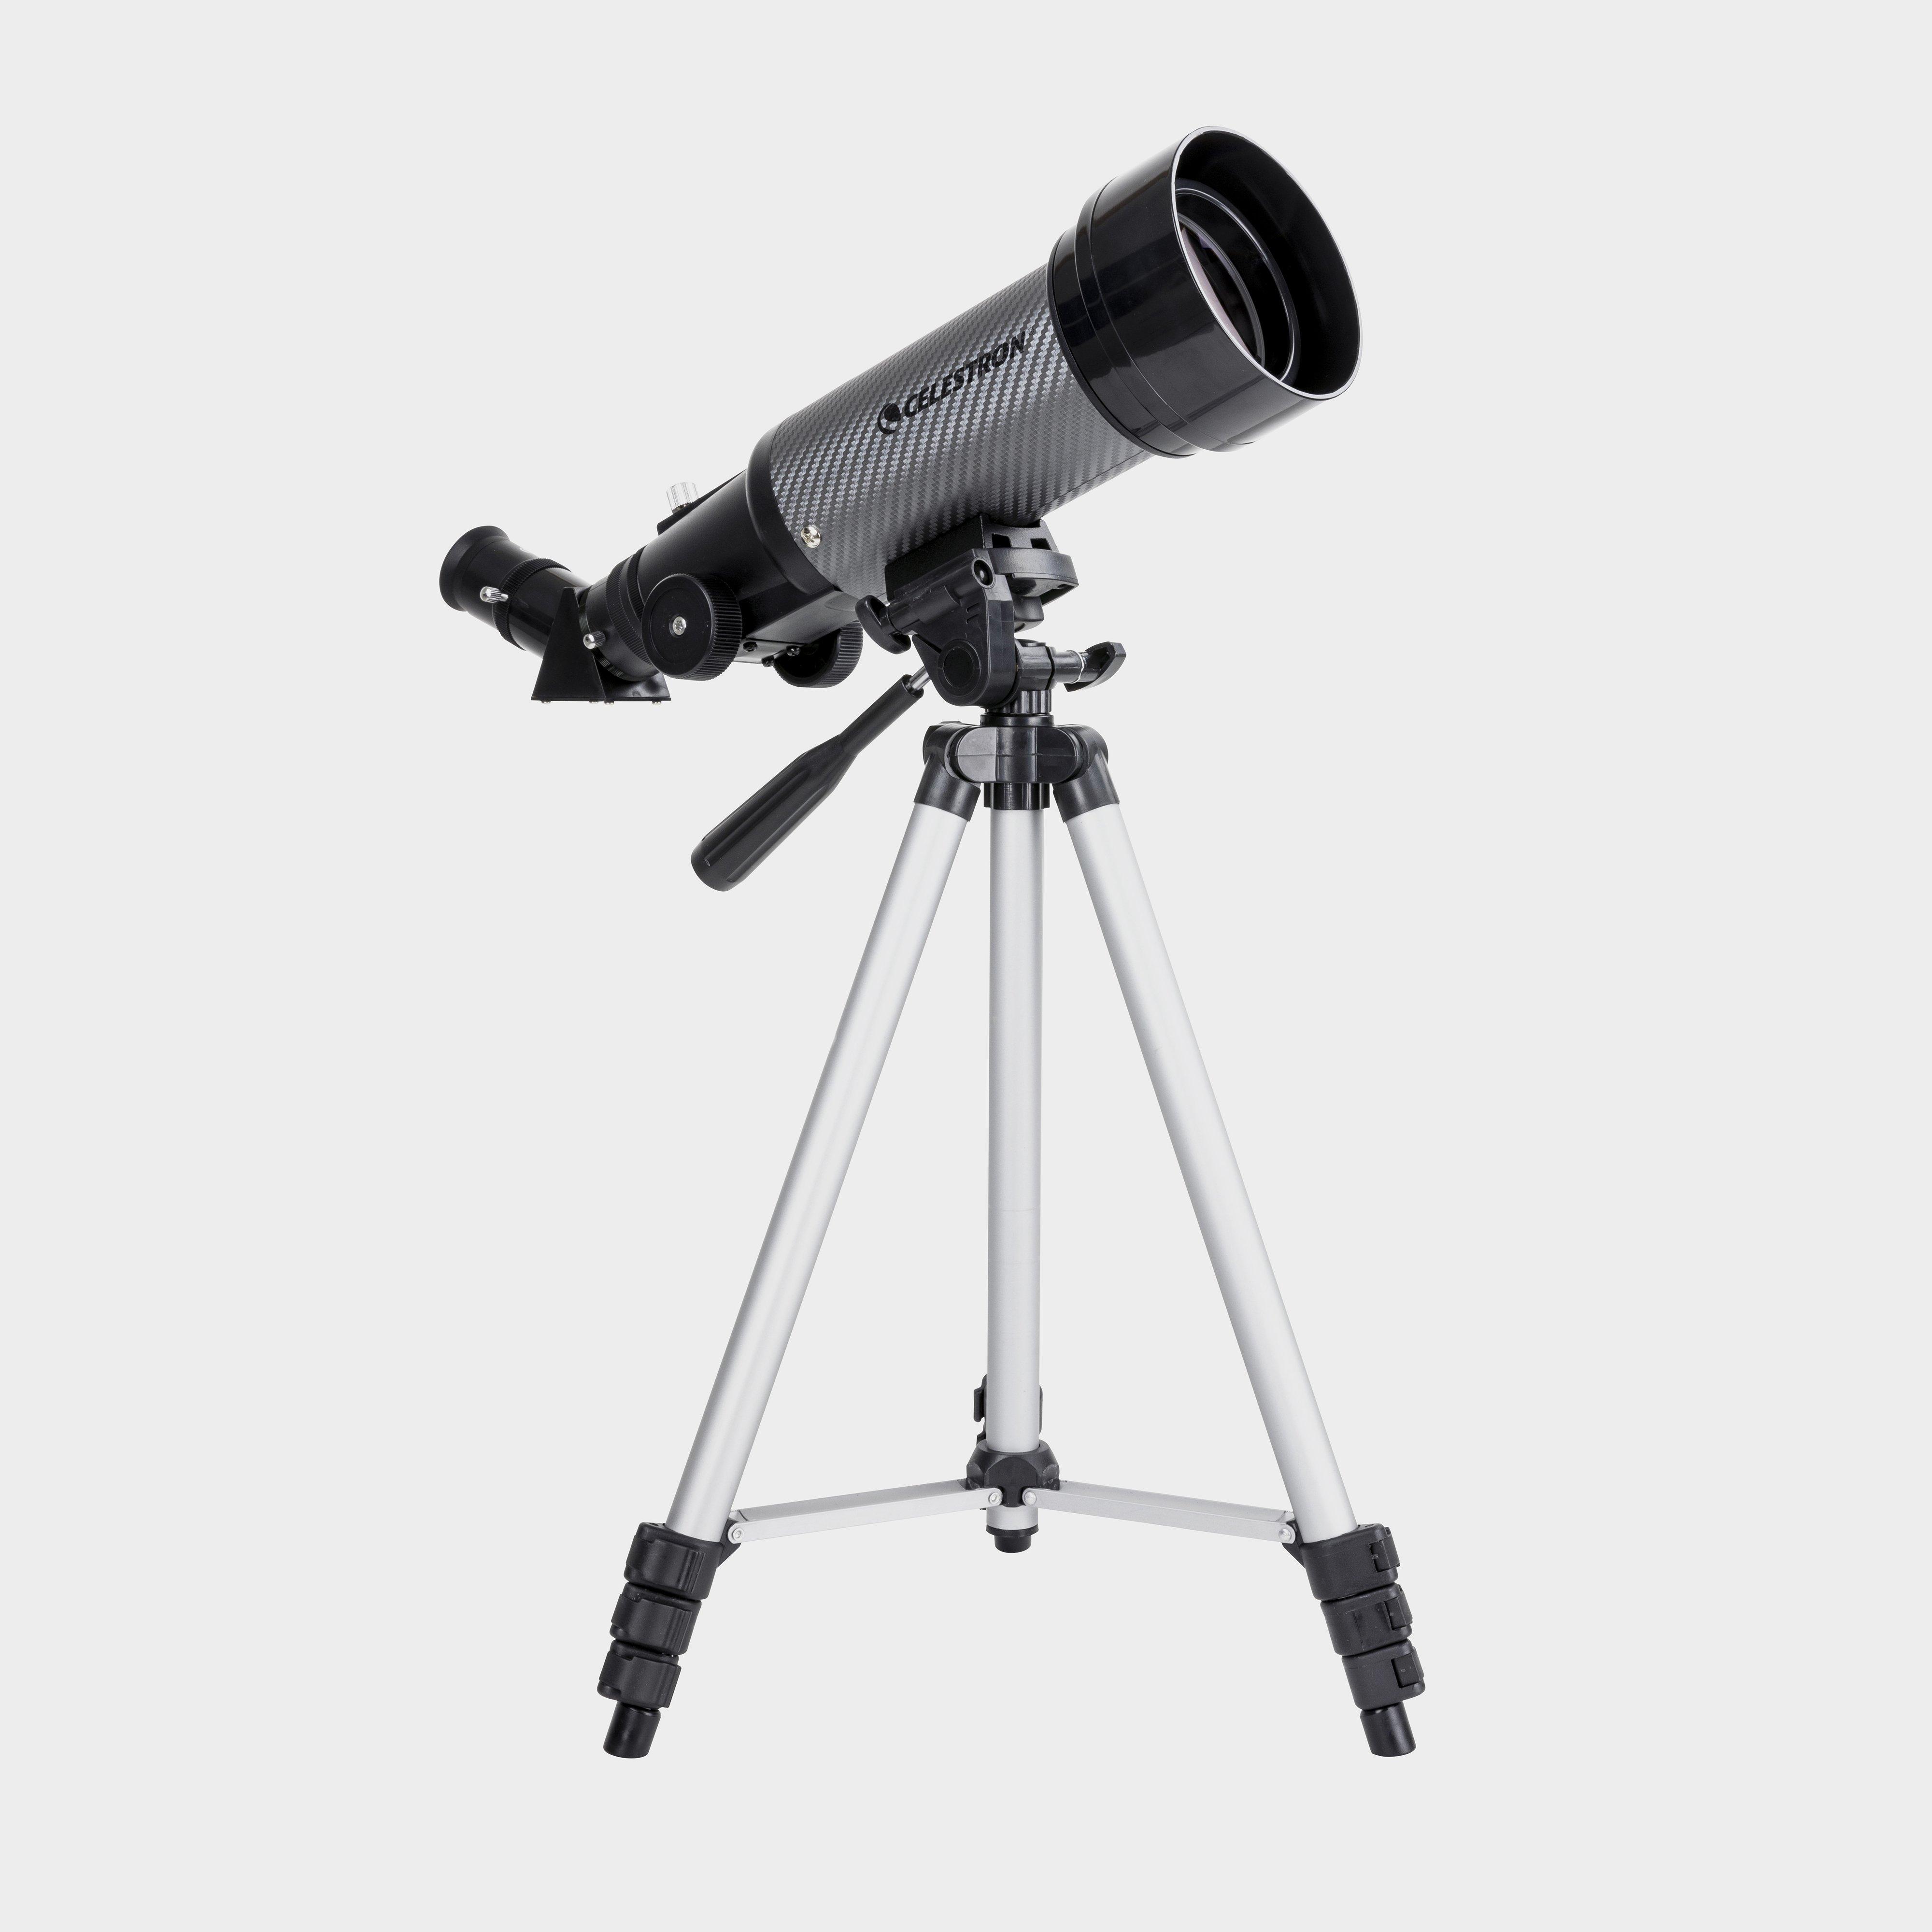 CELESTRON Travel Scope 70 DX with Backpack, Silver